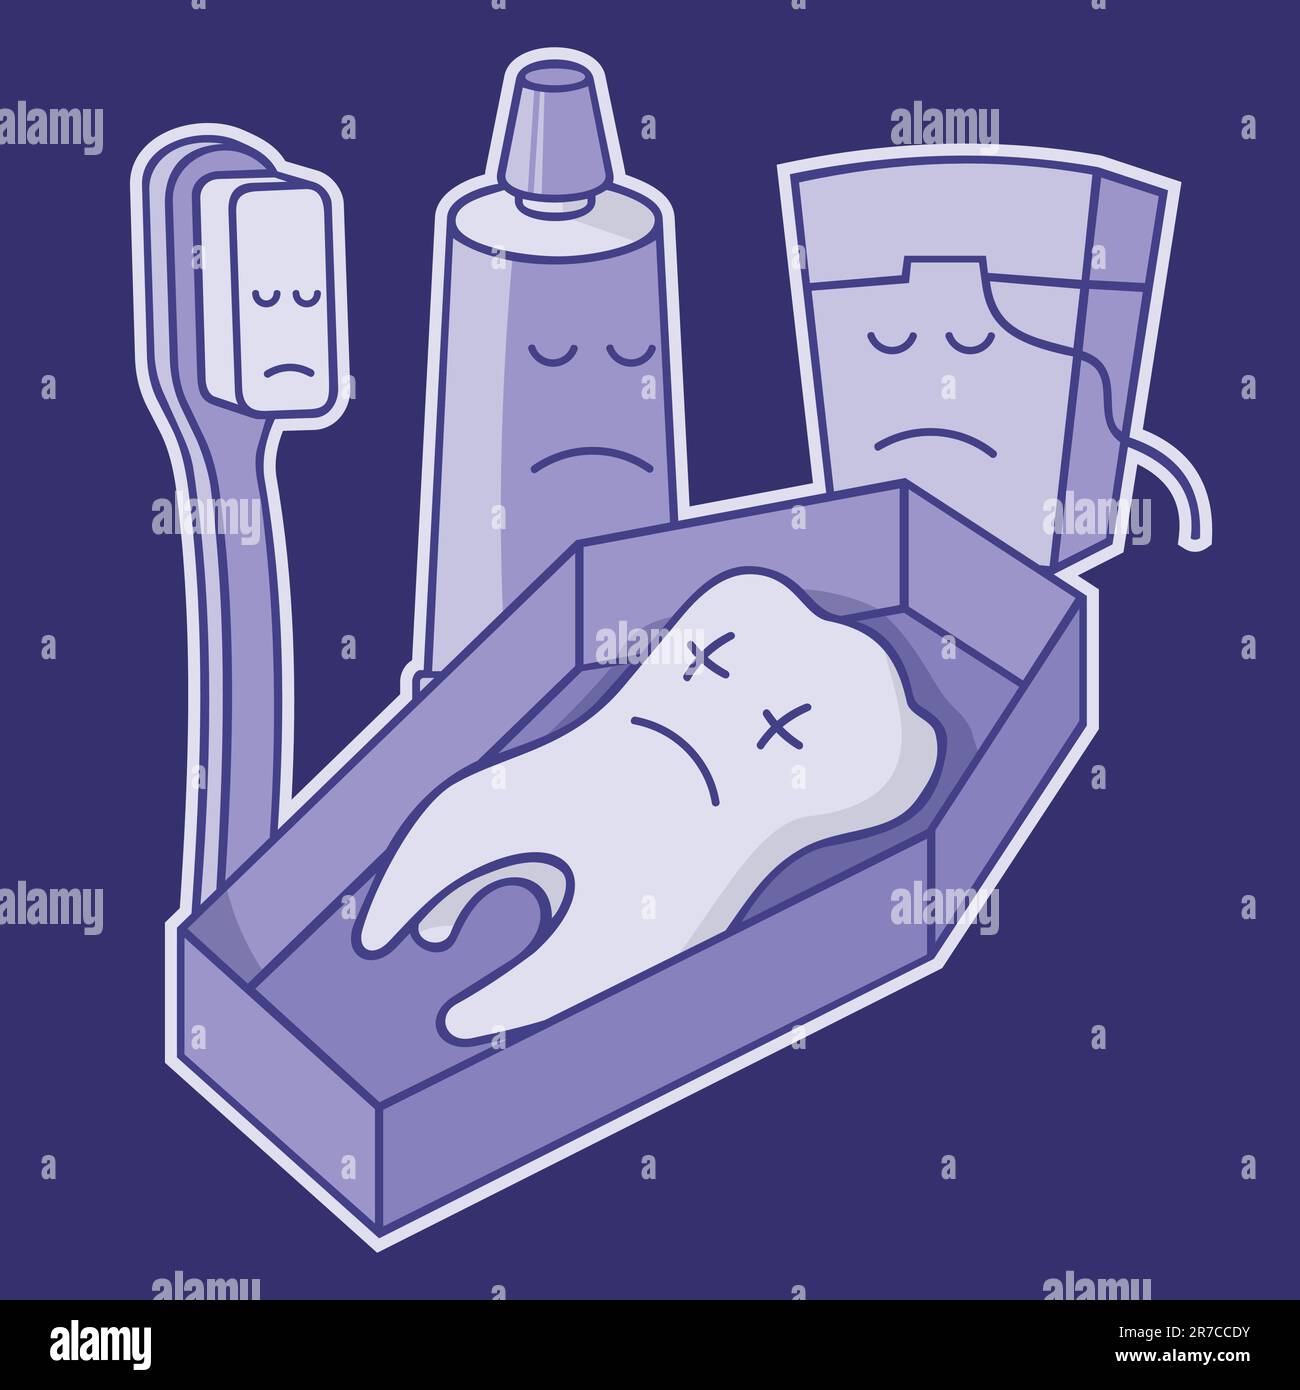 Dead tooth in coffin with toothbrush, toothpaste and dental floss, mauve cartoon illustration. Stock Vector